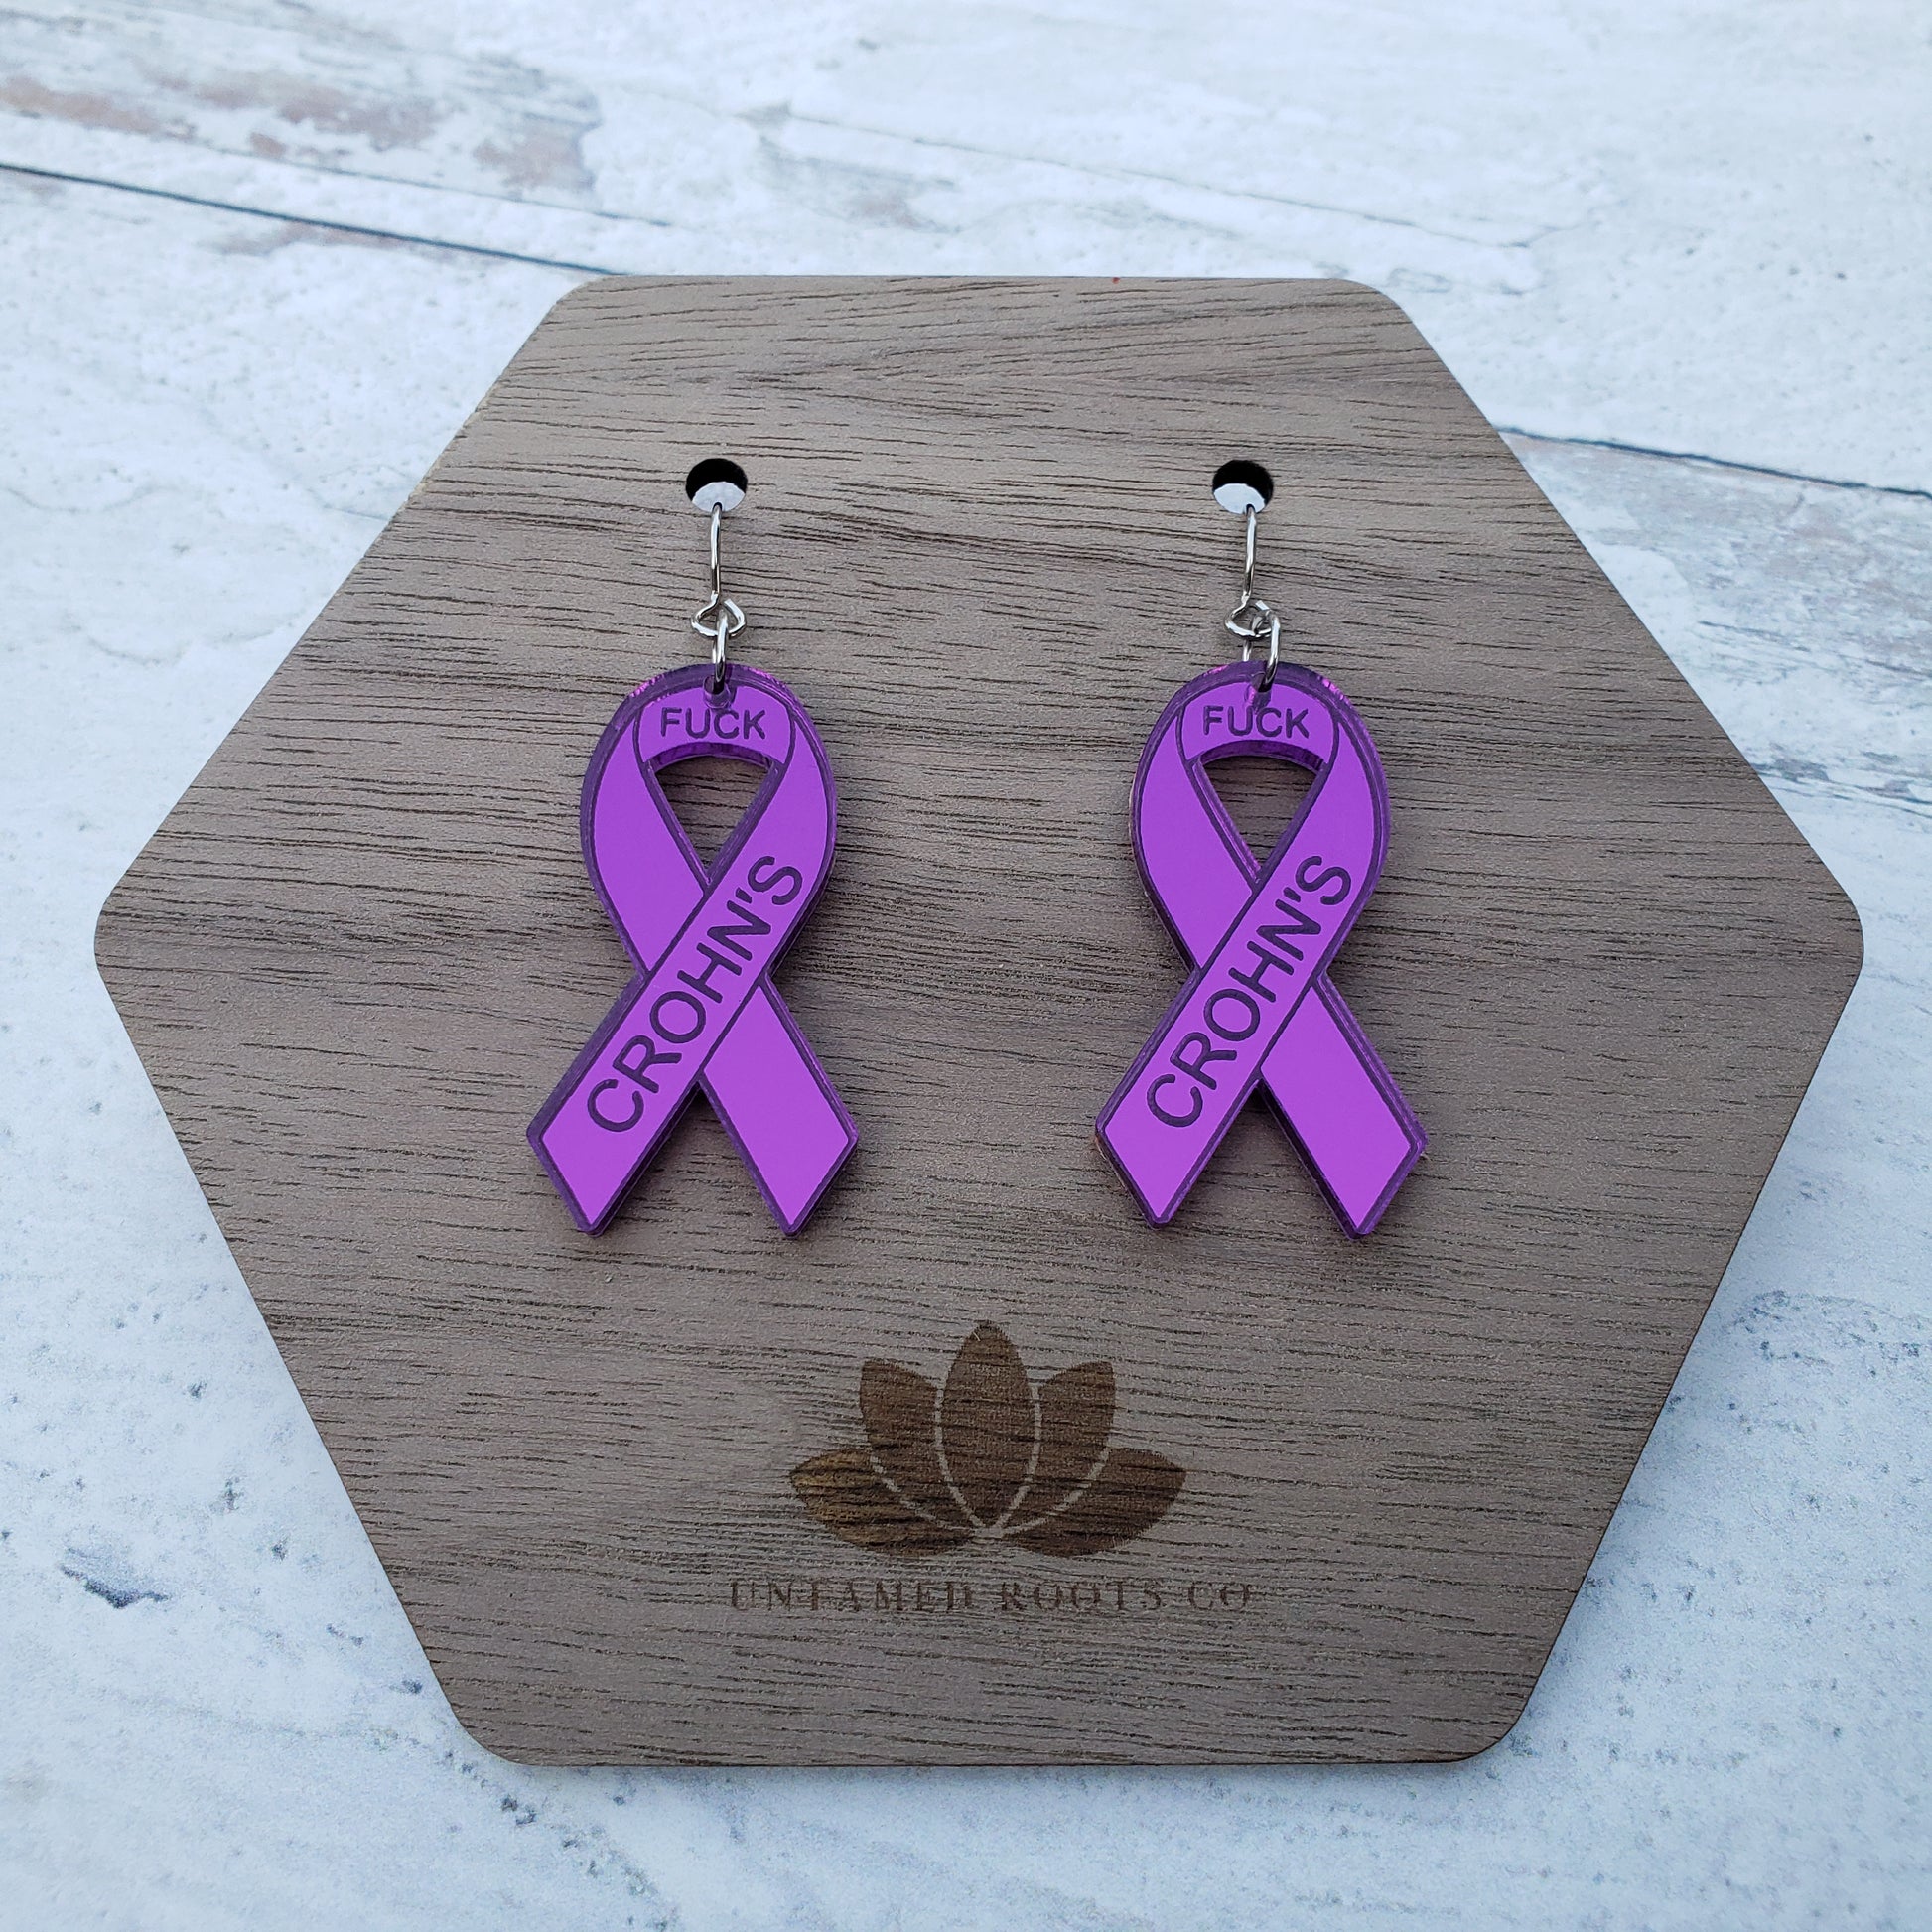 Fuck Crohn's Engraved purple mirror acrylic awareness ribbons on stainless steel earring wires.